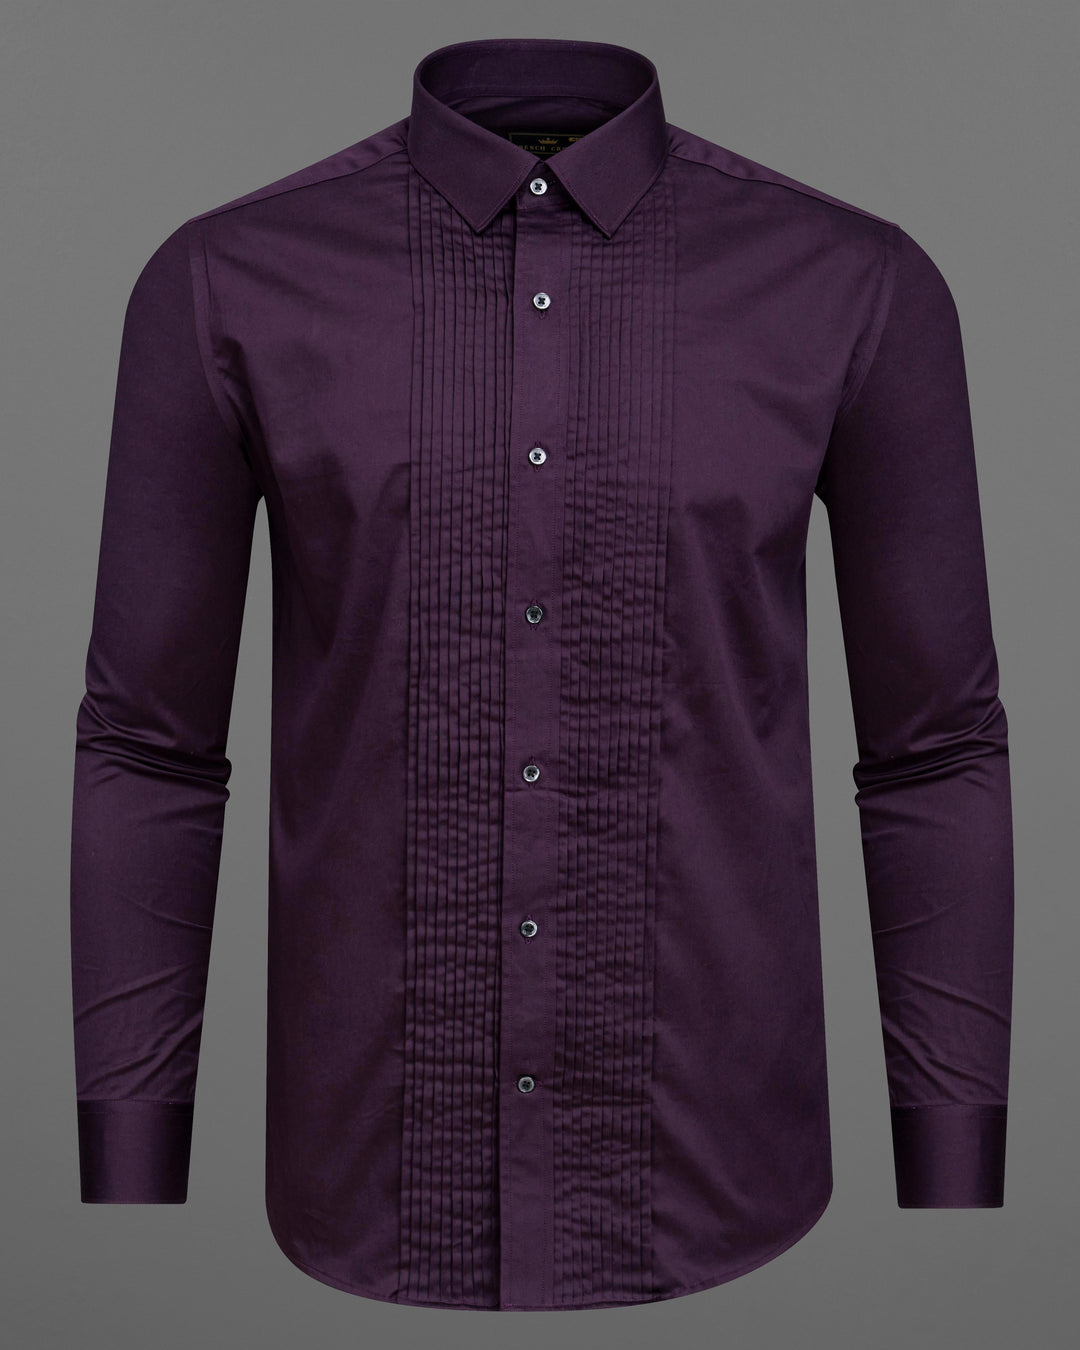 Details more than 133 shirt combination with grey jeans best